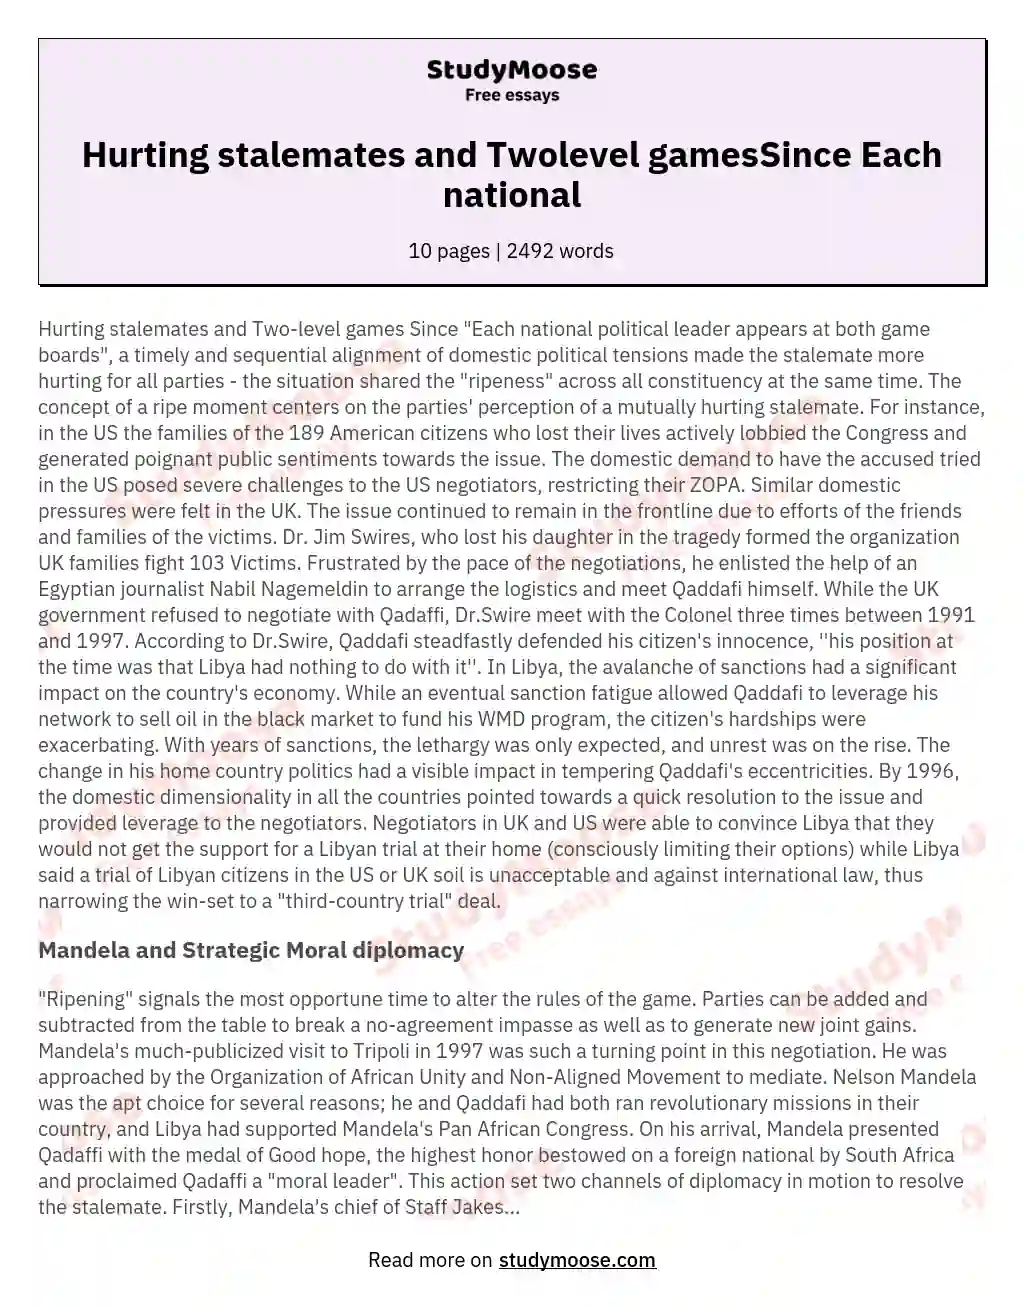 Hurting stalemates and Twolevel gamesSince Each national